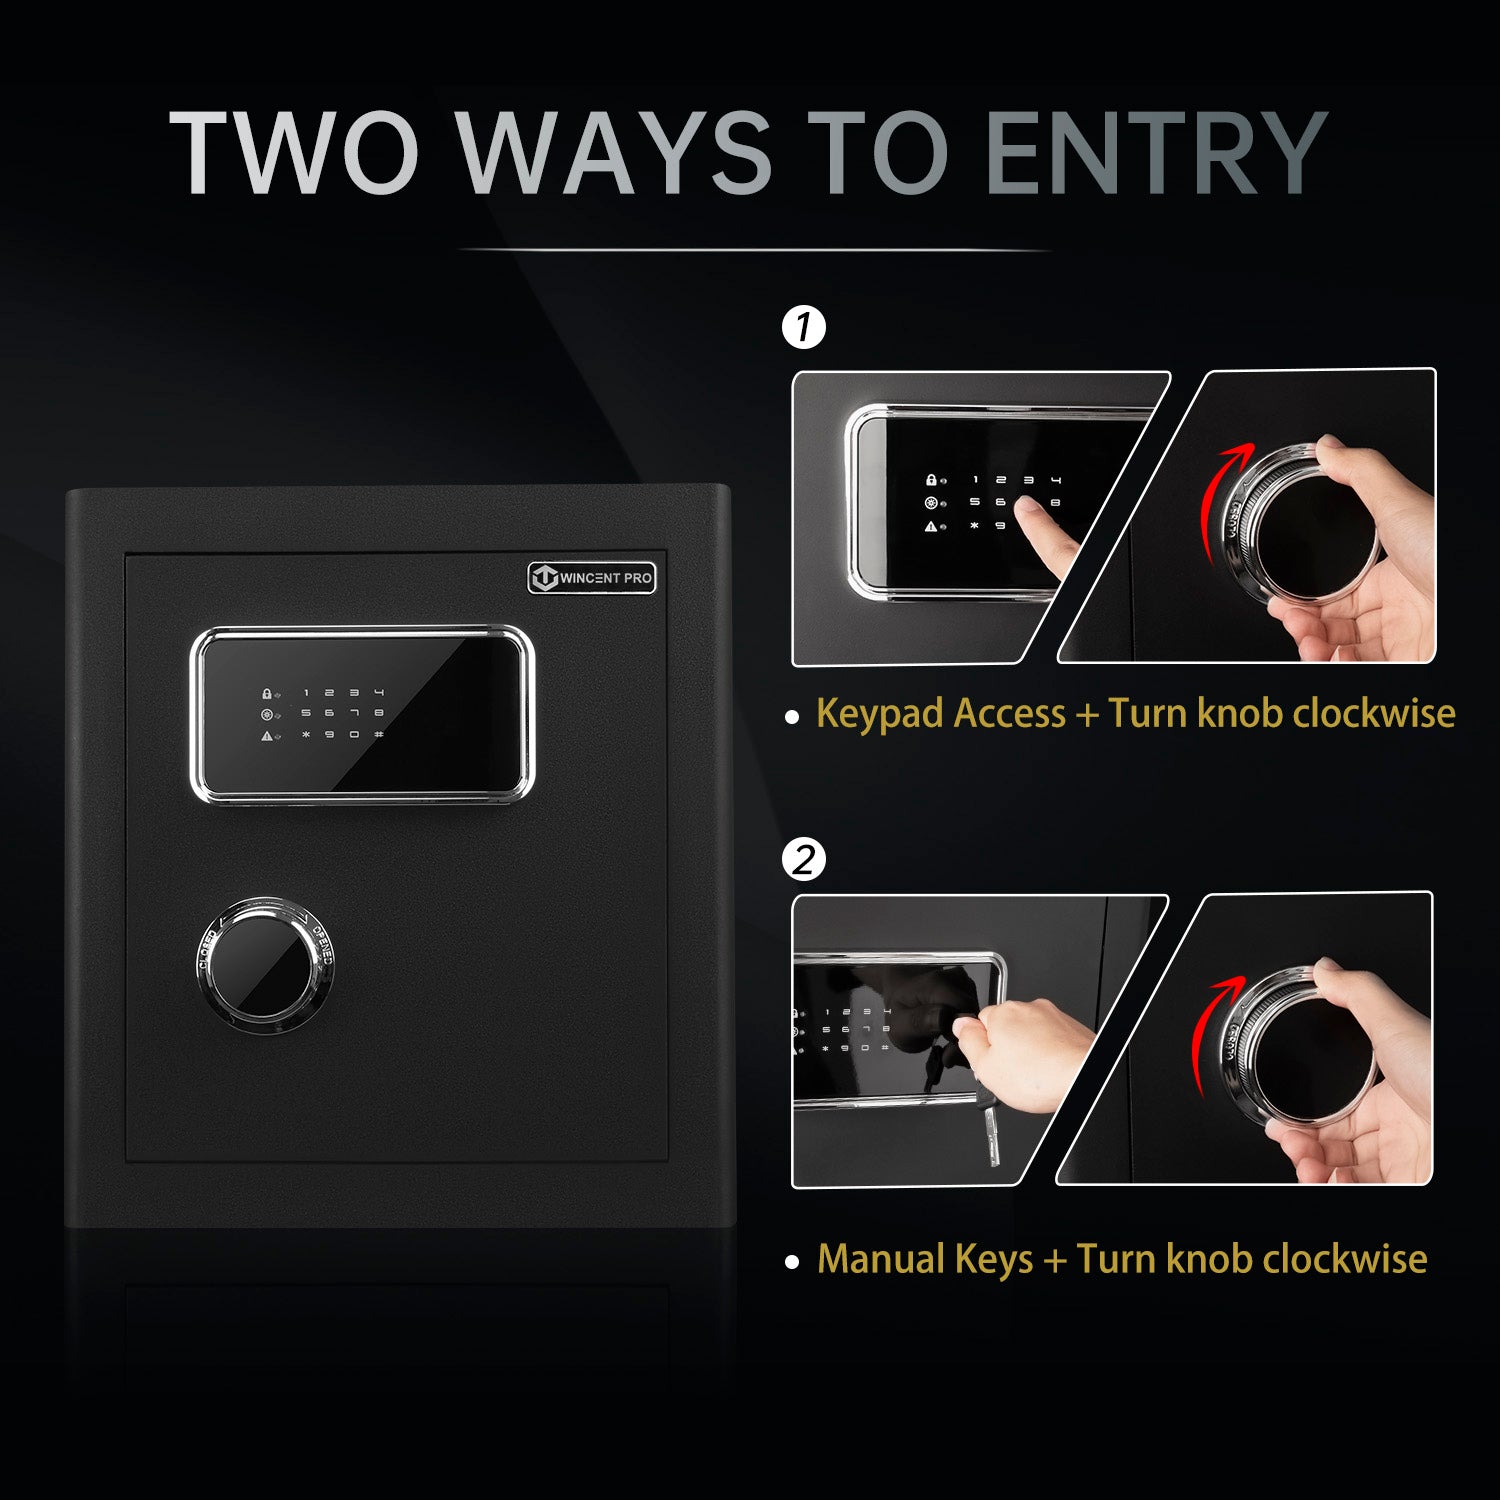 WINCENT PRO Deluxe Home Security Safe